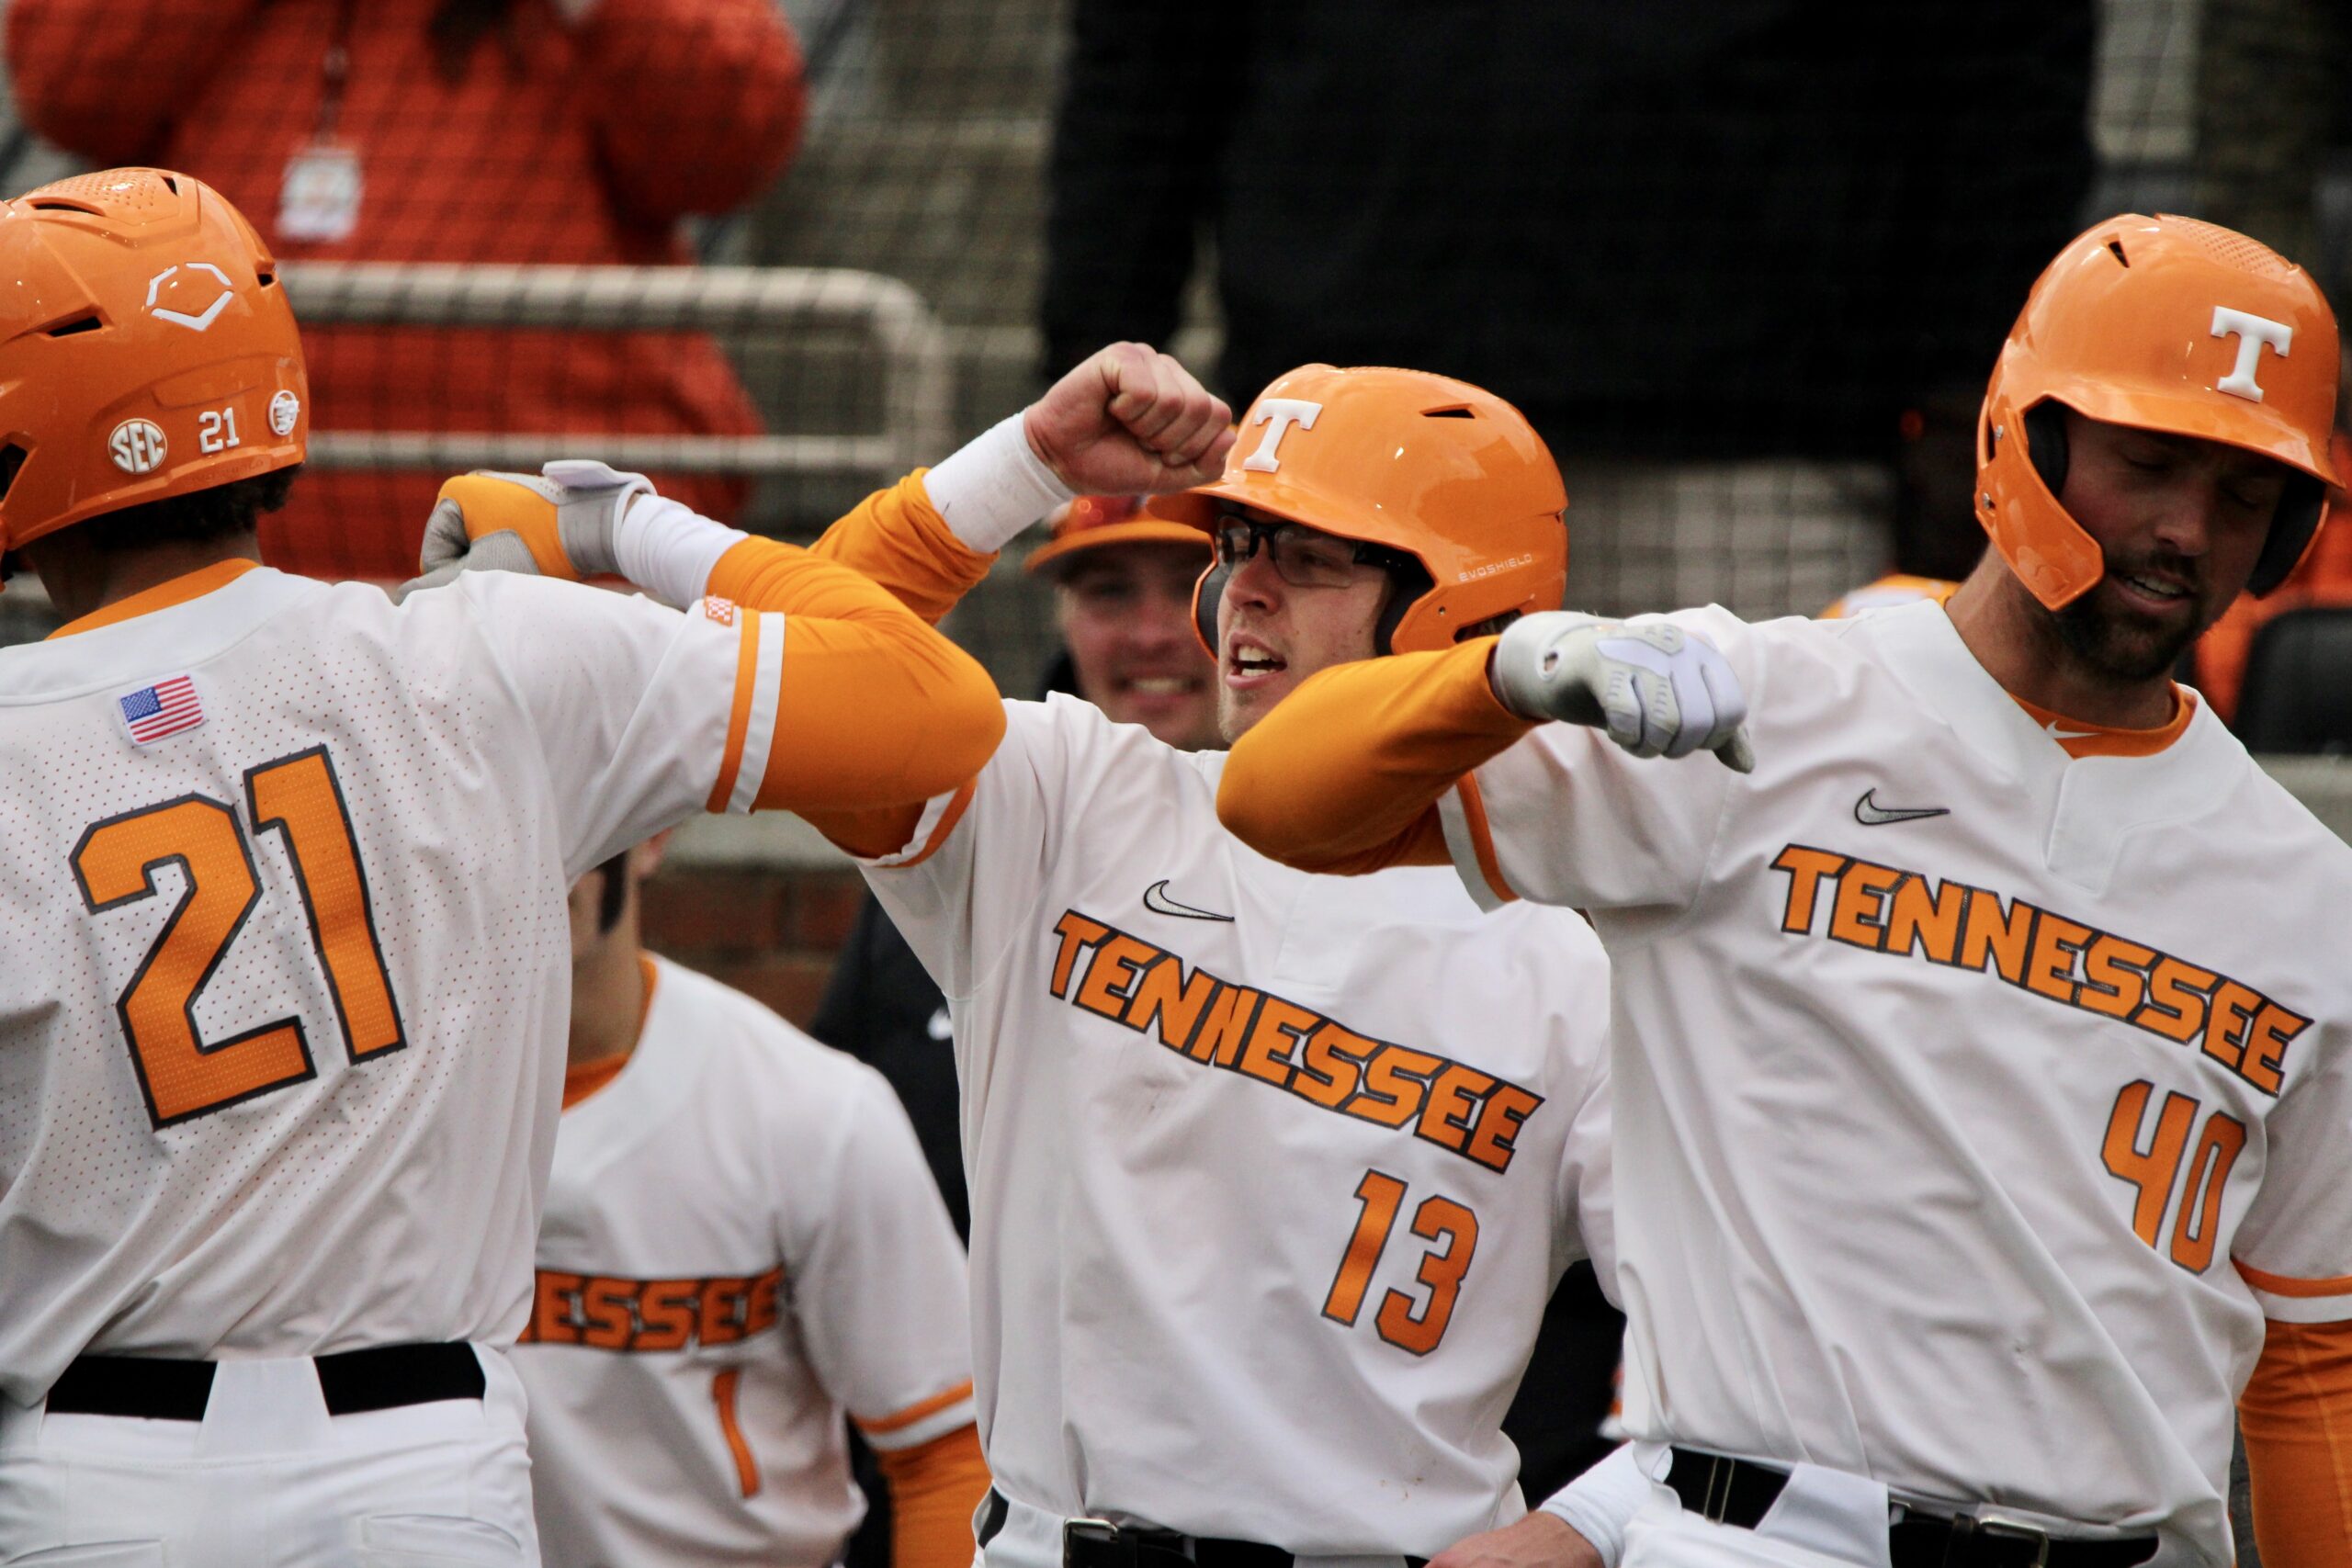 Tennessee sweeps Iona with 68-3 combined score in three games